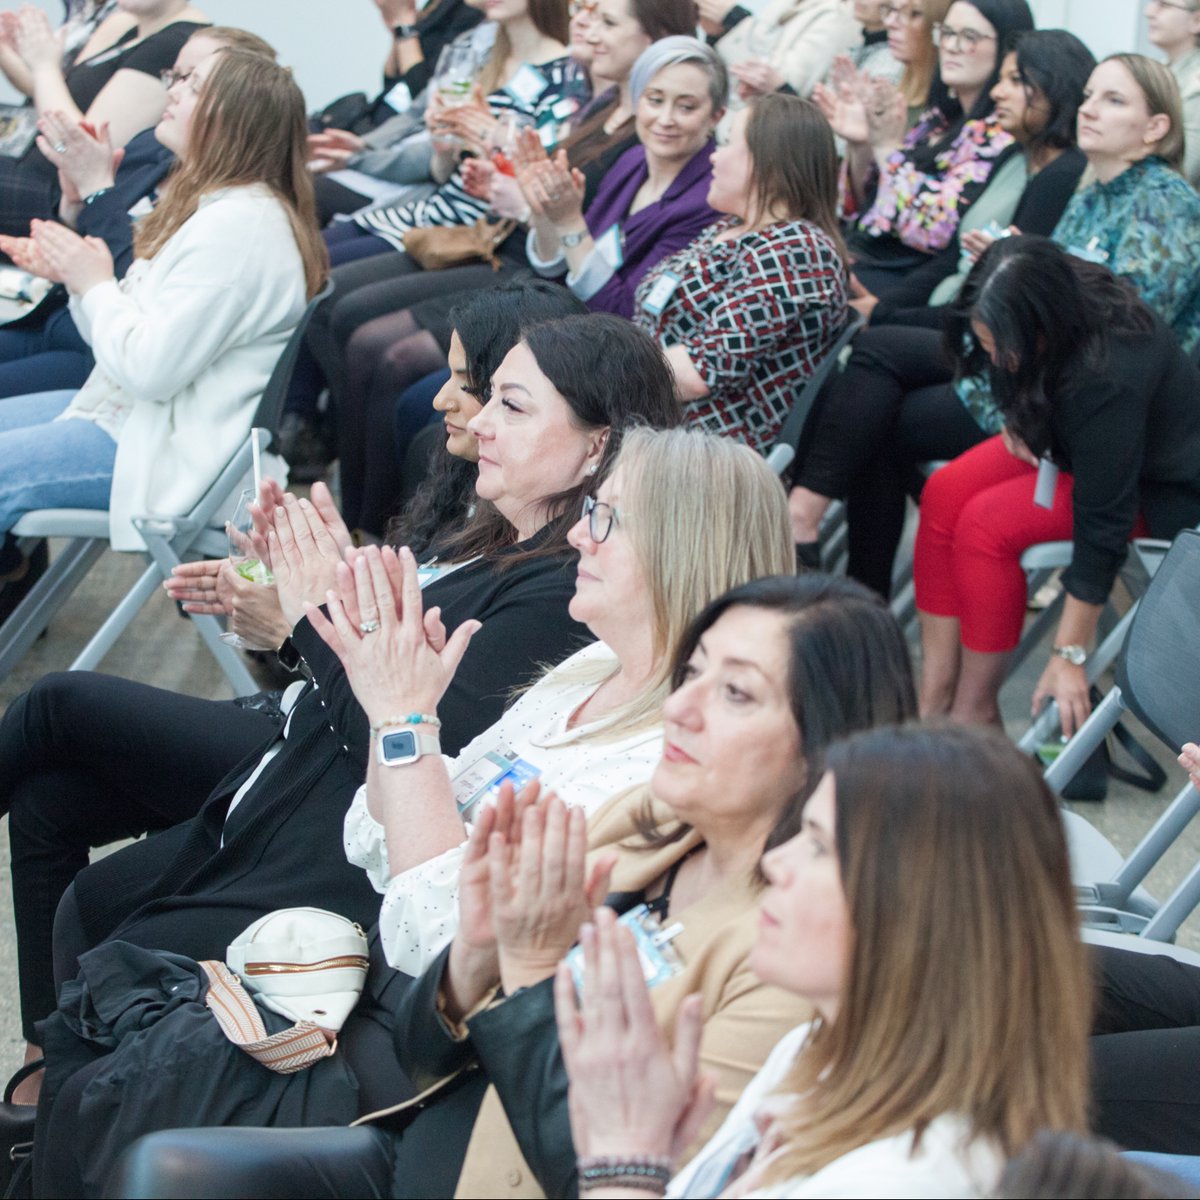 Thanks for joining #WomenUnited's #MindFULL, especially speakers Matricia Bauer, Brandi Gruninger & Tanaura Seon. Shoutout to @ATBFinancial, @EPCOR, @PCLConstruction, & Peace and Power Movement for the support! Your energy made it a success! Relive the moments in our photos. 💖